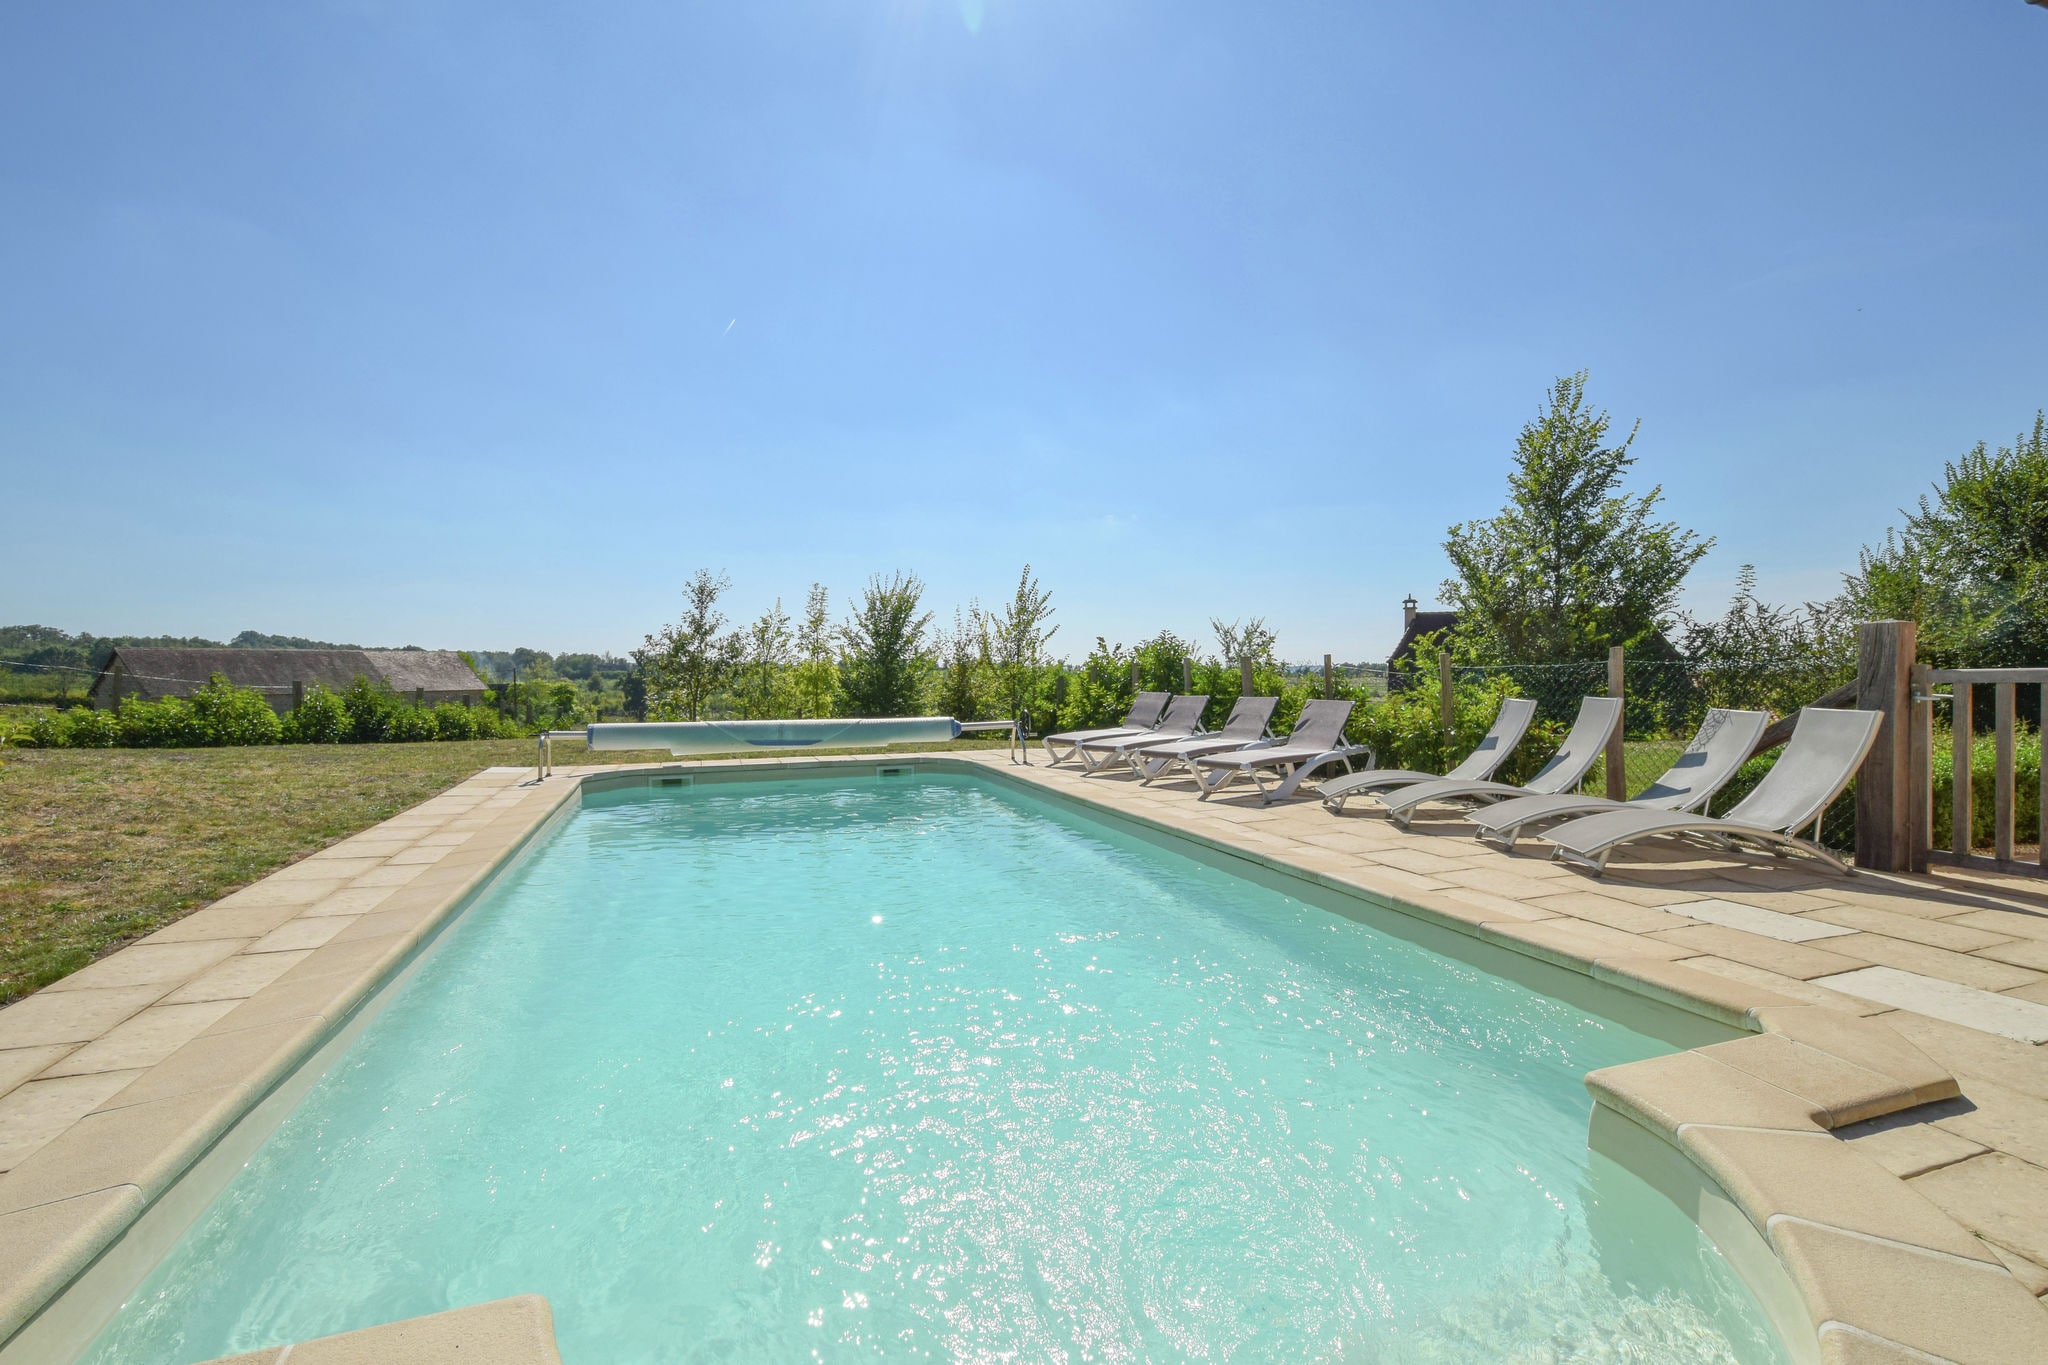 Luxury villa with private pool, panoramic views and space for two families